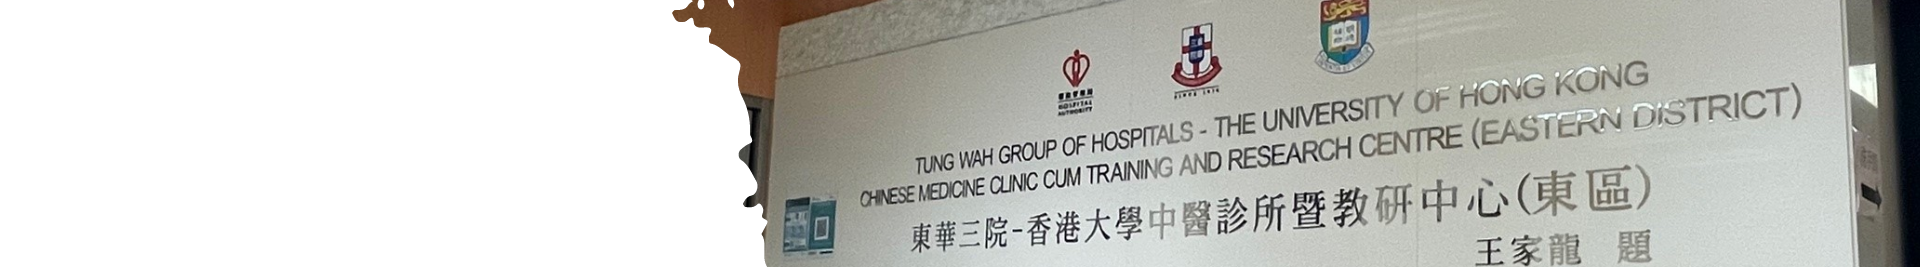 Chinese Medicine as part of the Civil Service Medical Benefits-1